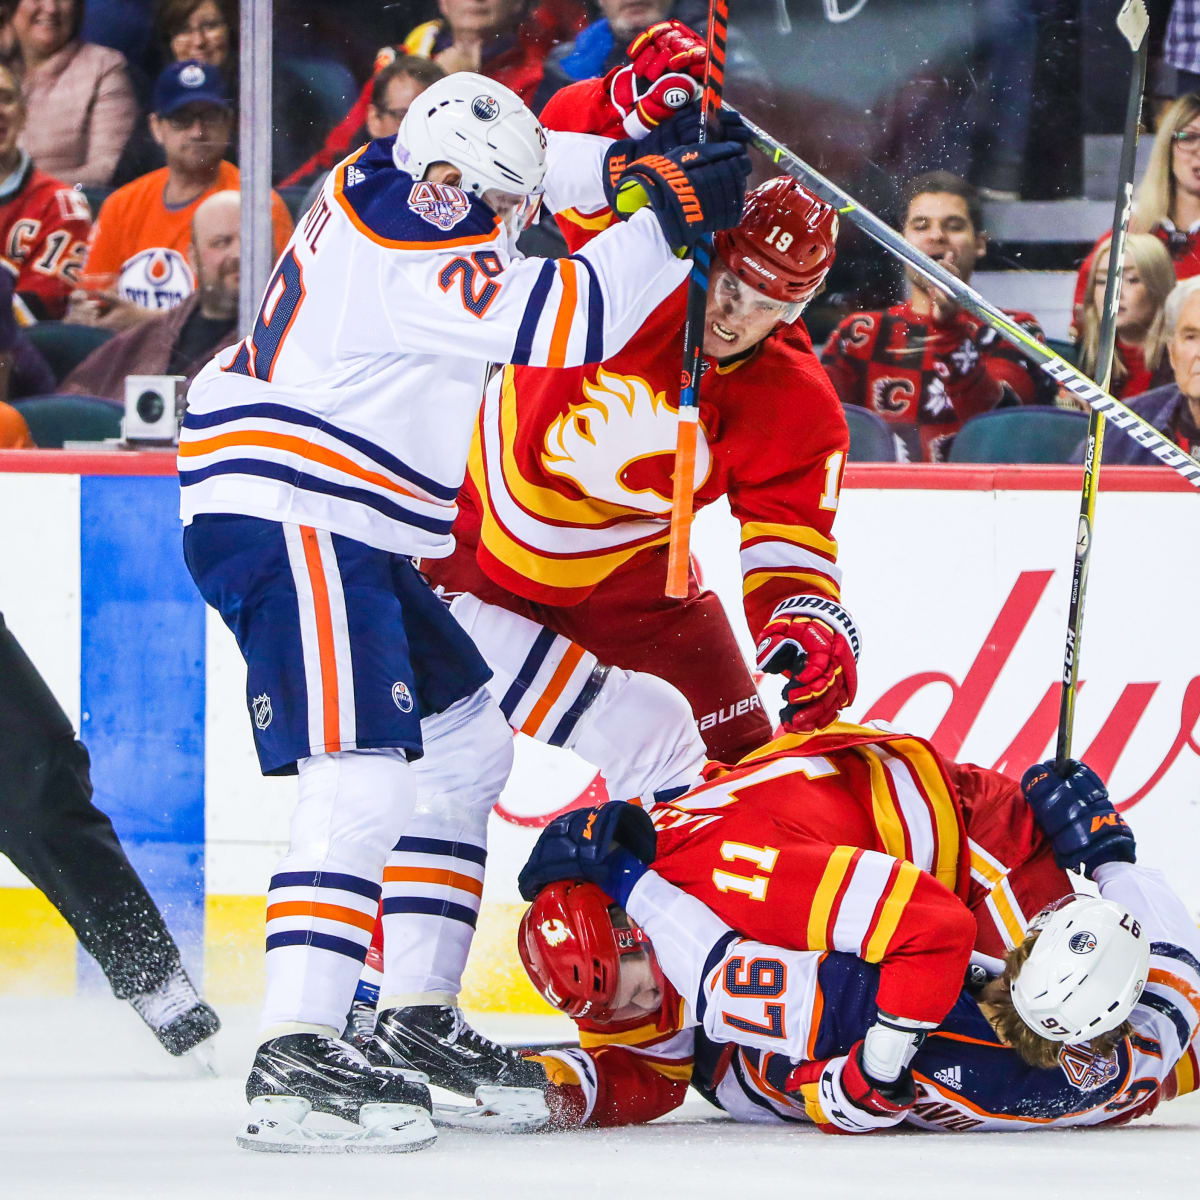 The Battle of Alberta has all the makings of a classic